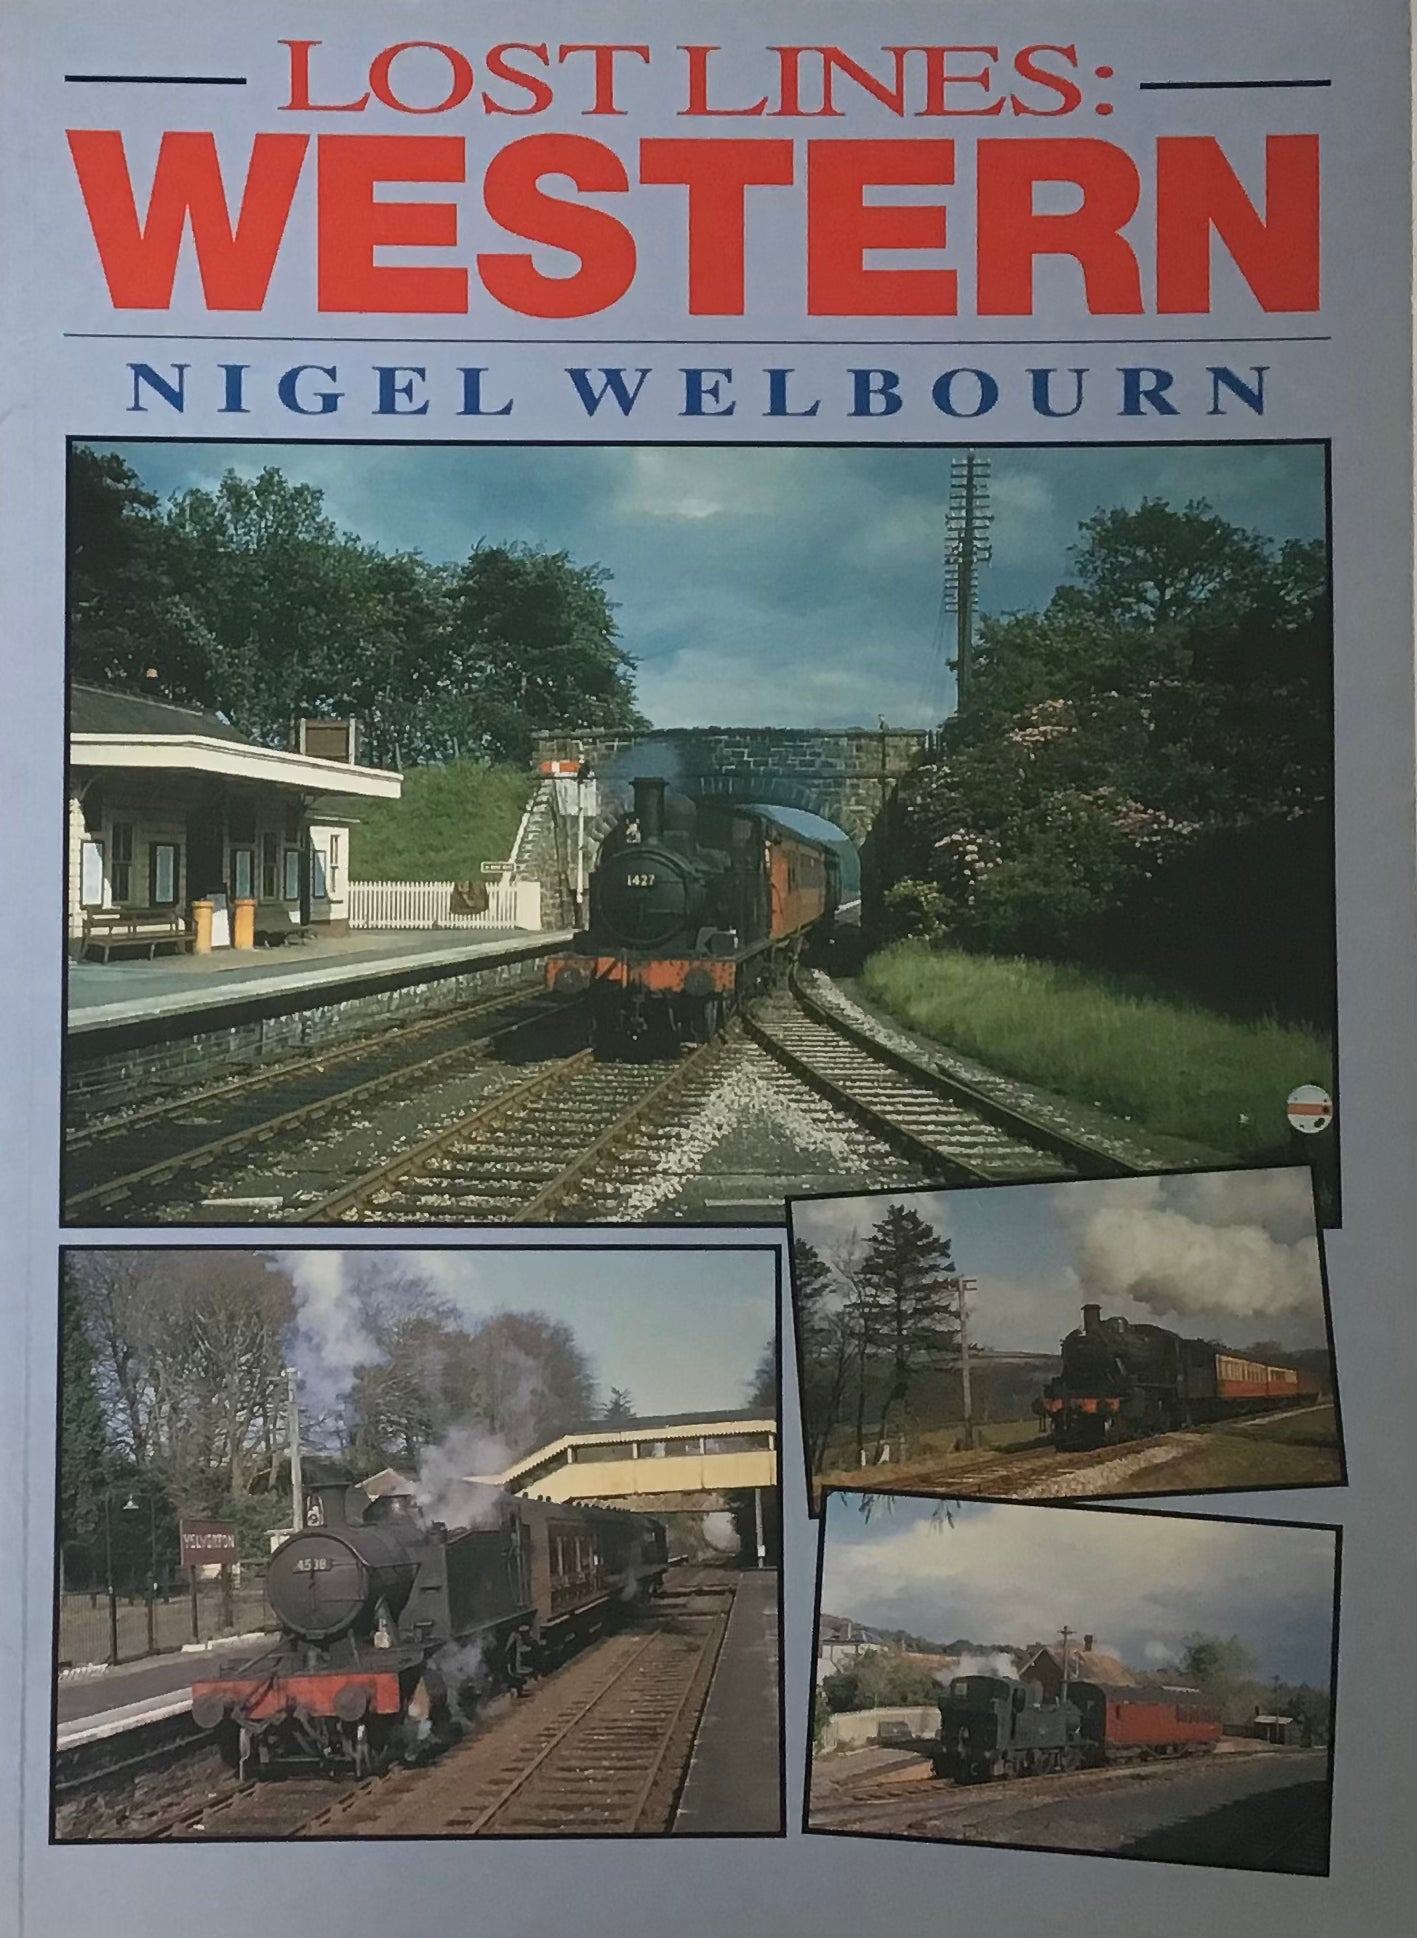 Lost Lines : Western - Nigel Welbourn - Chester Model Centre